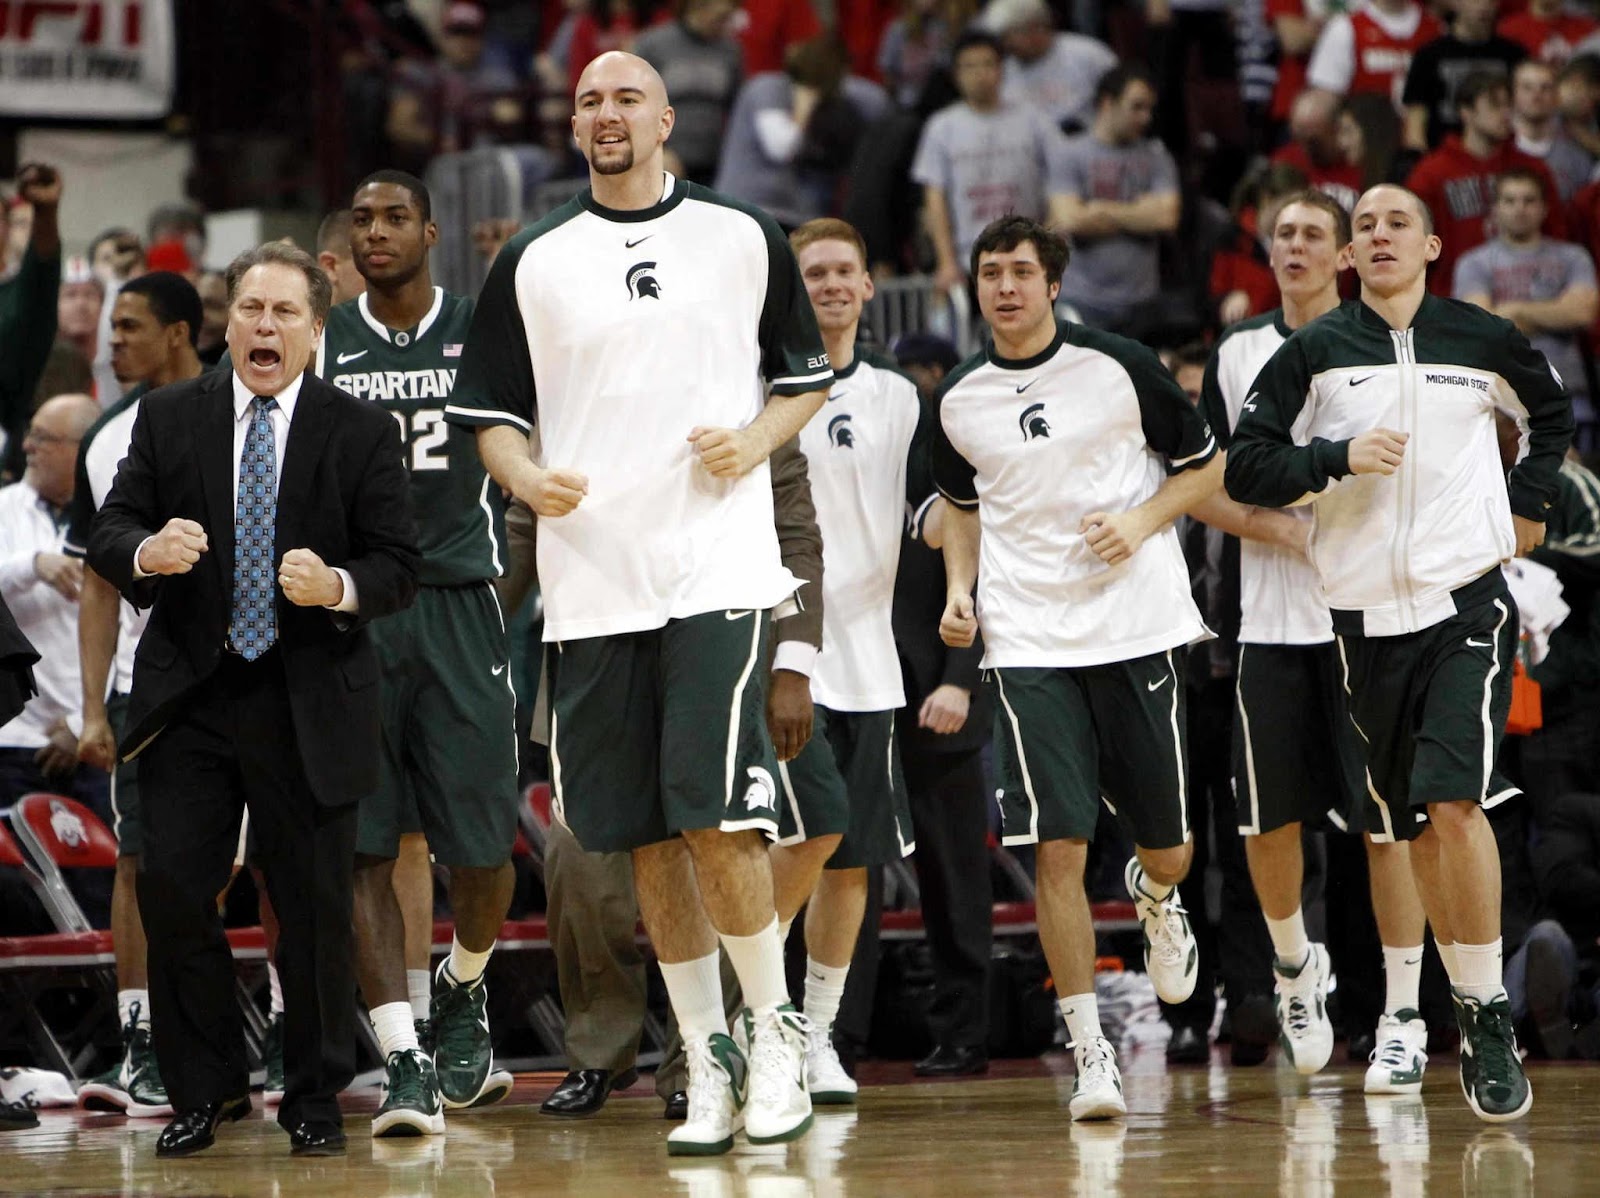 Anthony Ianni speaks out on anti-bullying, autism, and his words still  carry weight at Michigan State - mlive.com